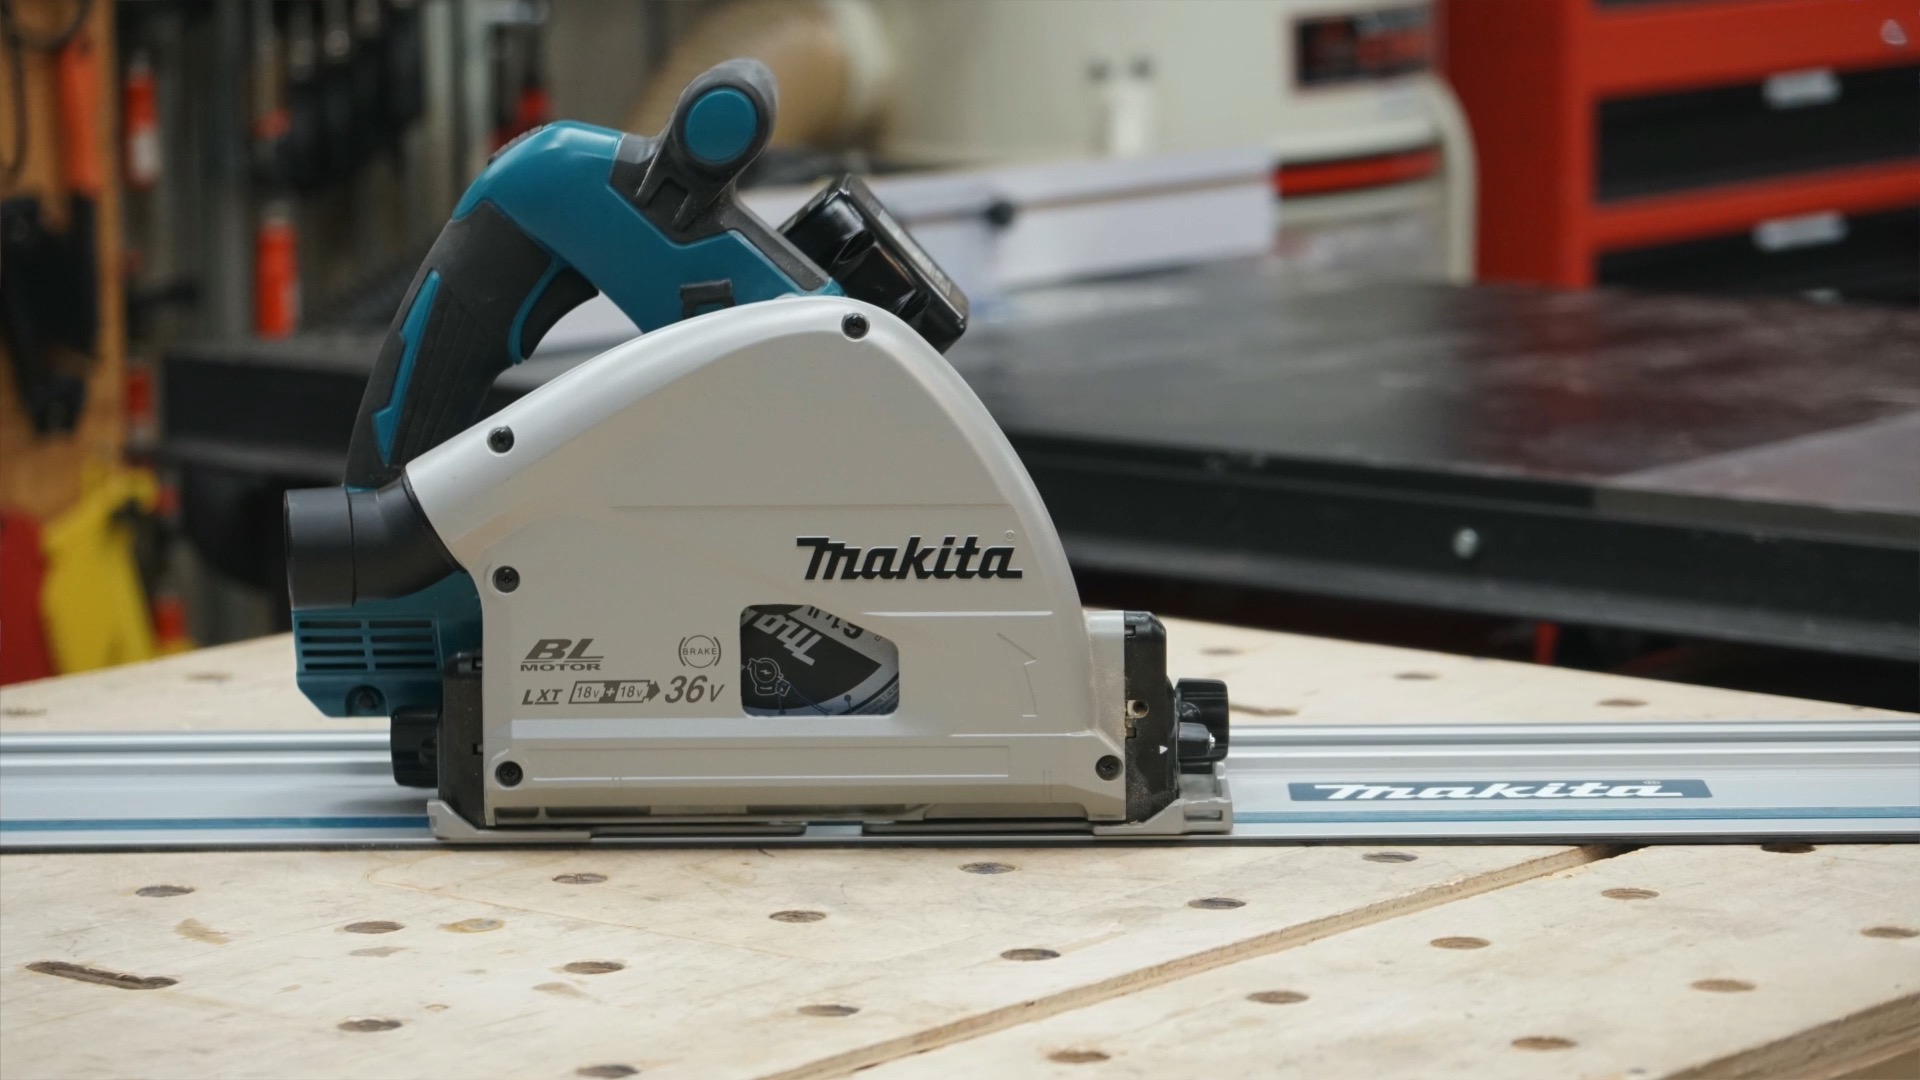 Makita Reviews -4 Years Later - Did We Get It Right? - Tool Box Buzz Tool Box Buzz